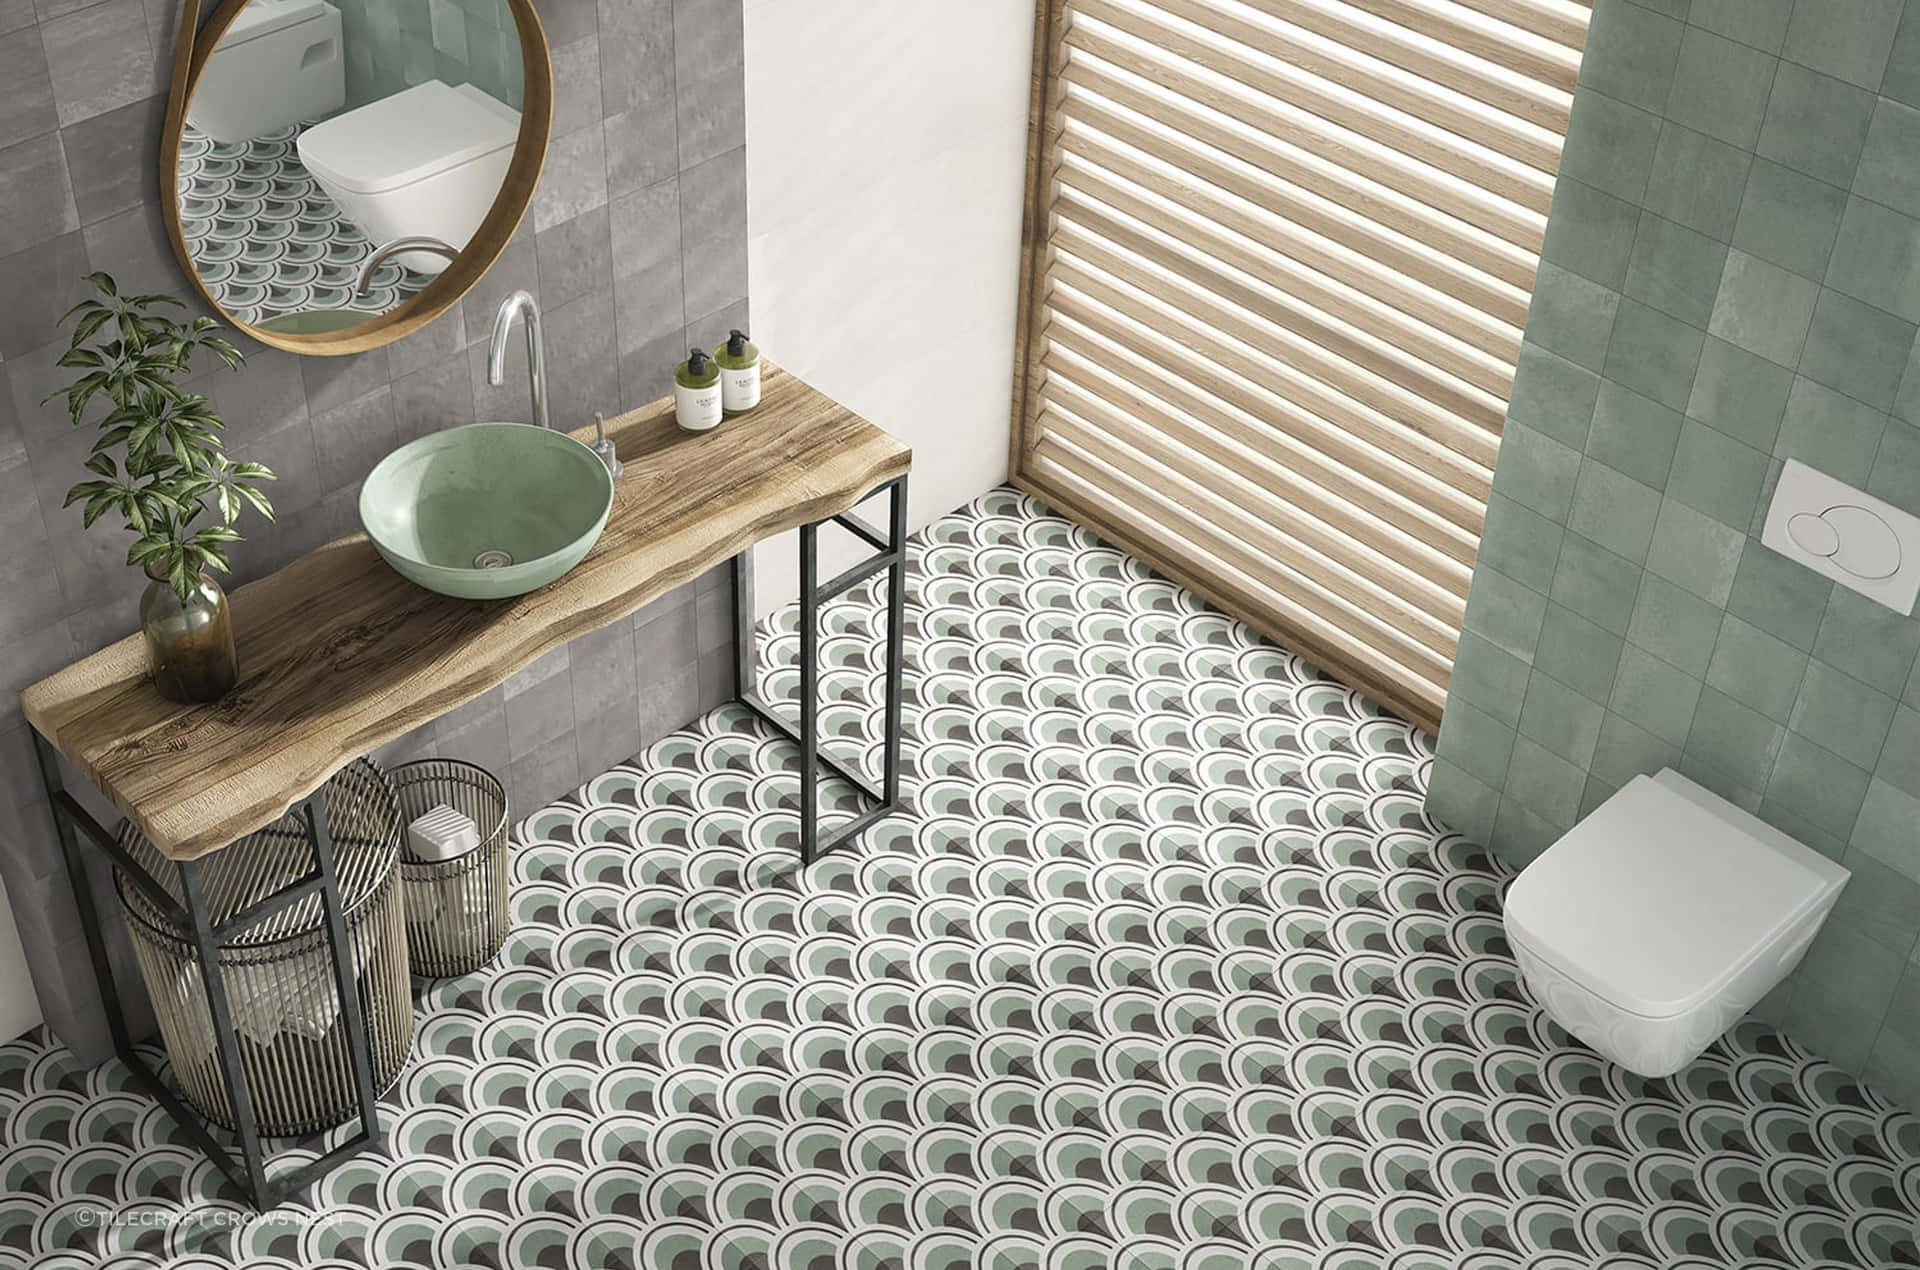 Bring a Unique Look Into Any Room with Tile